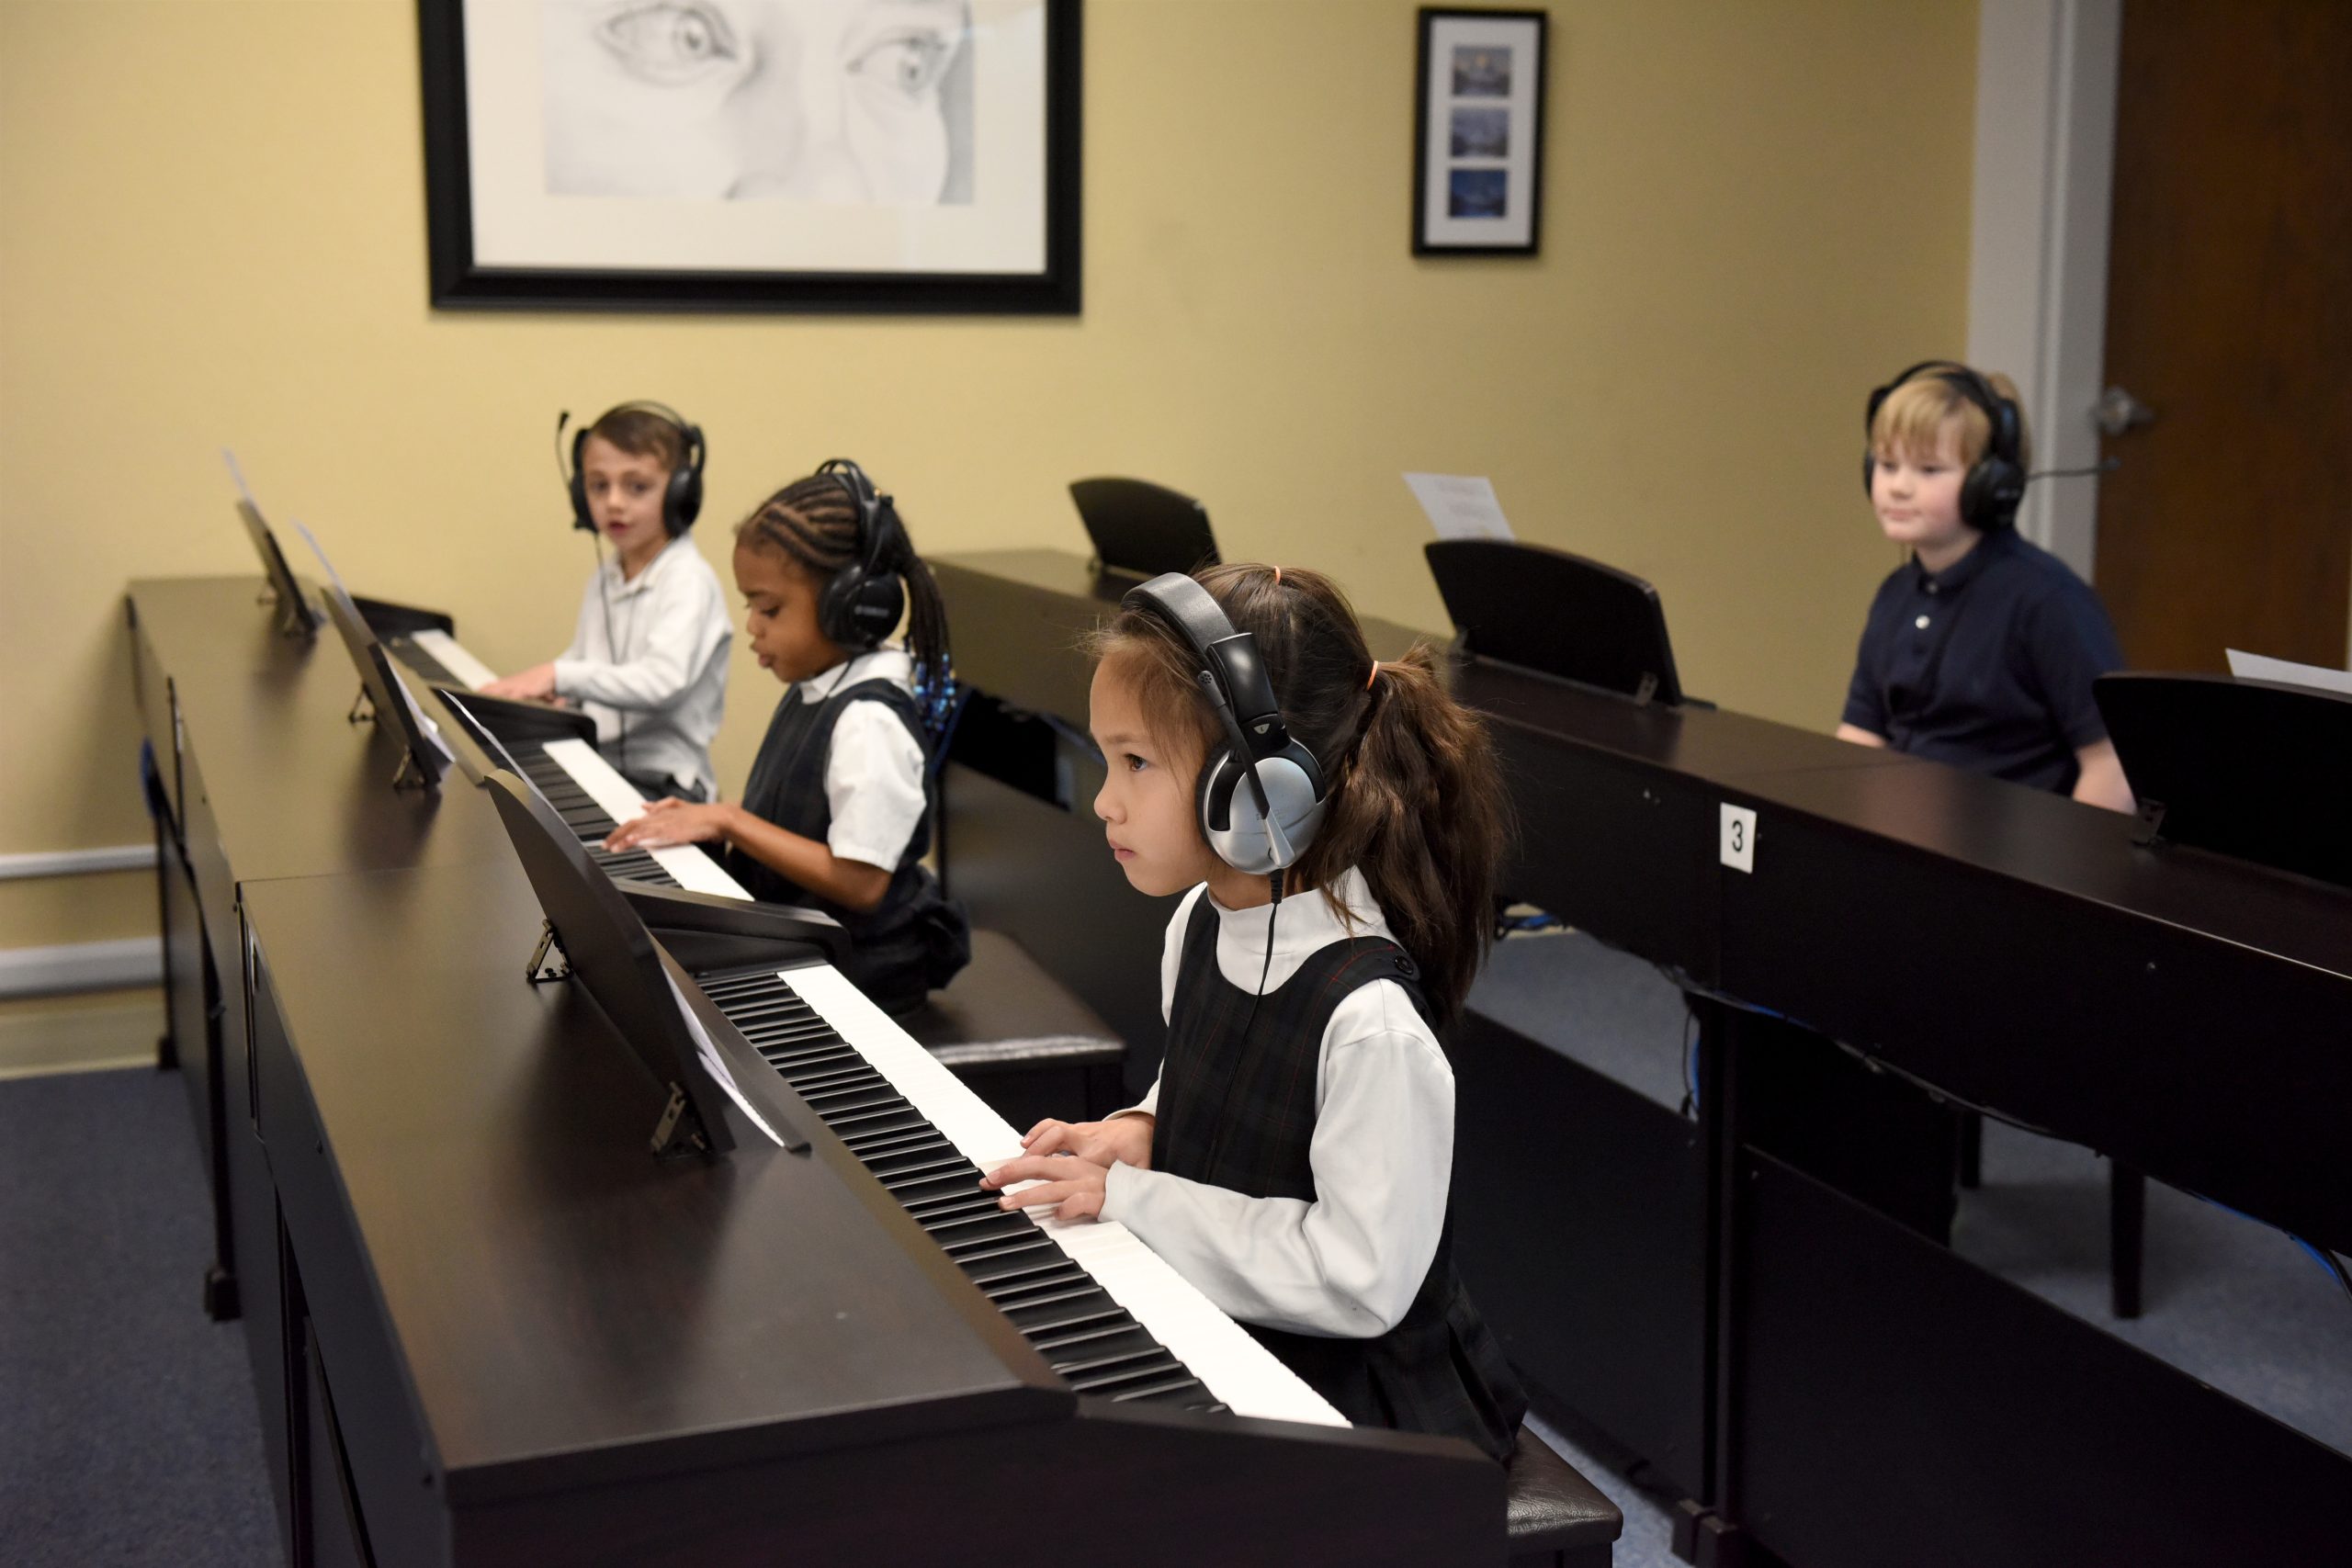 Students learn to read music on the piano with Waterford's music specialist.